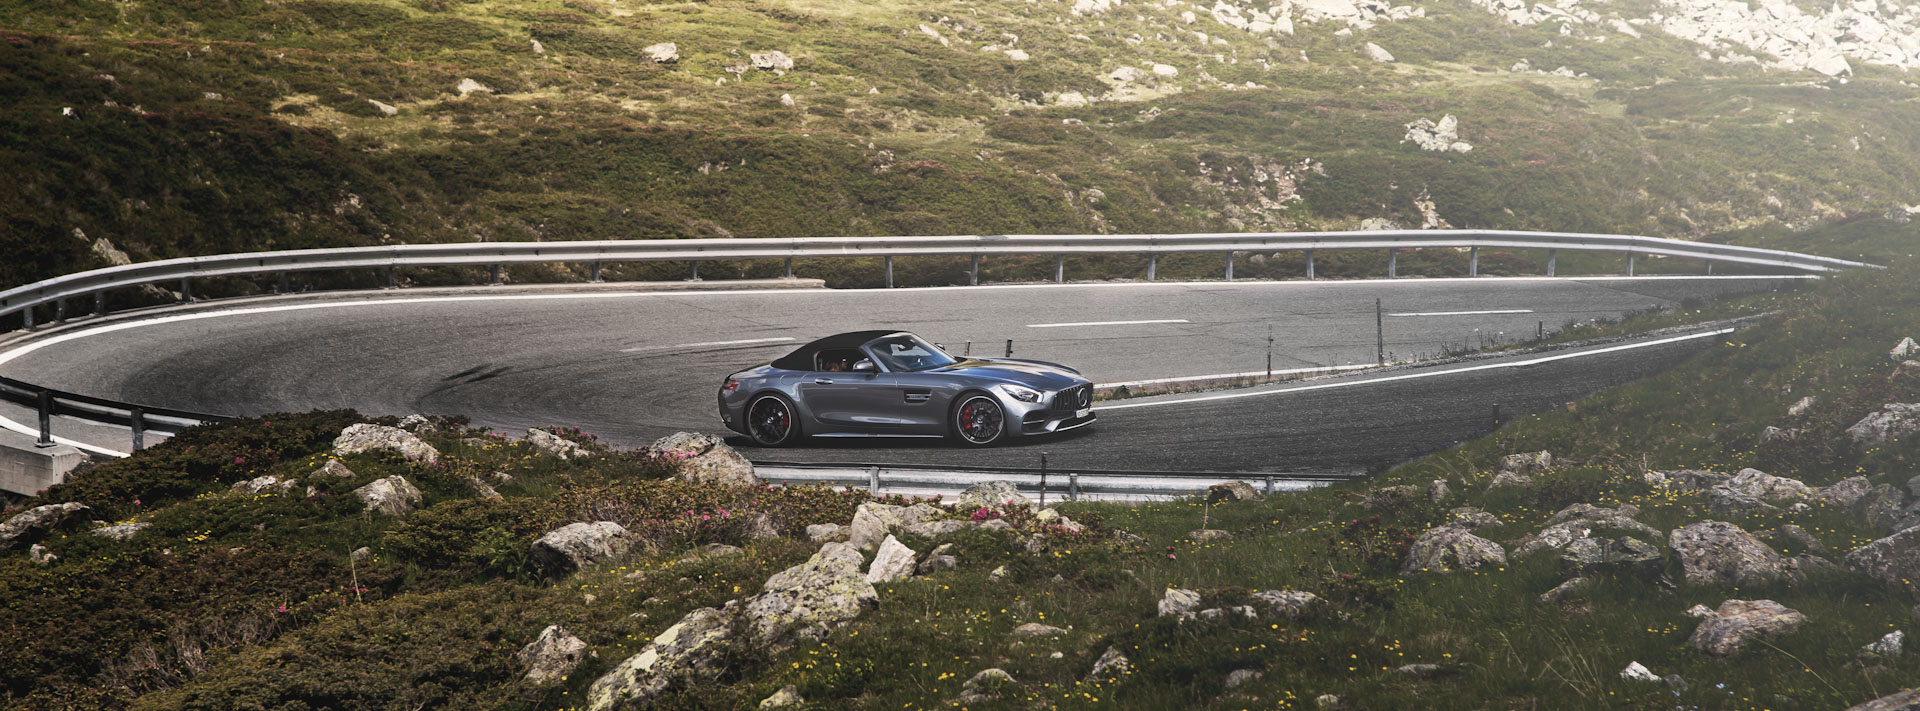 Supercar Experiences with AMG GT Roadster  in Alps